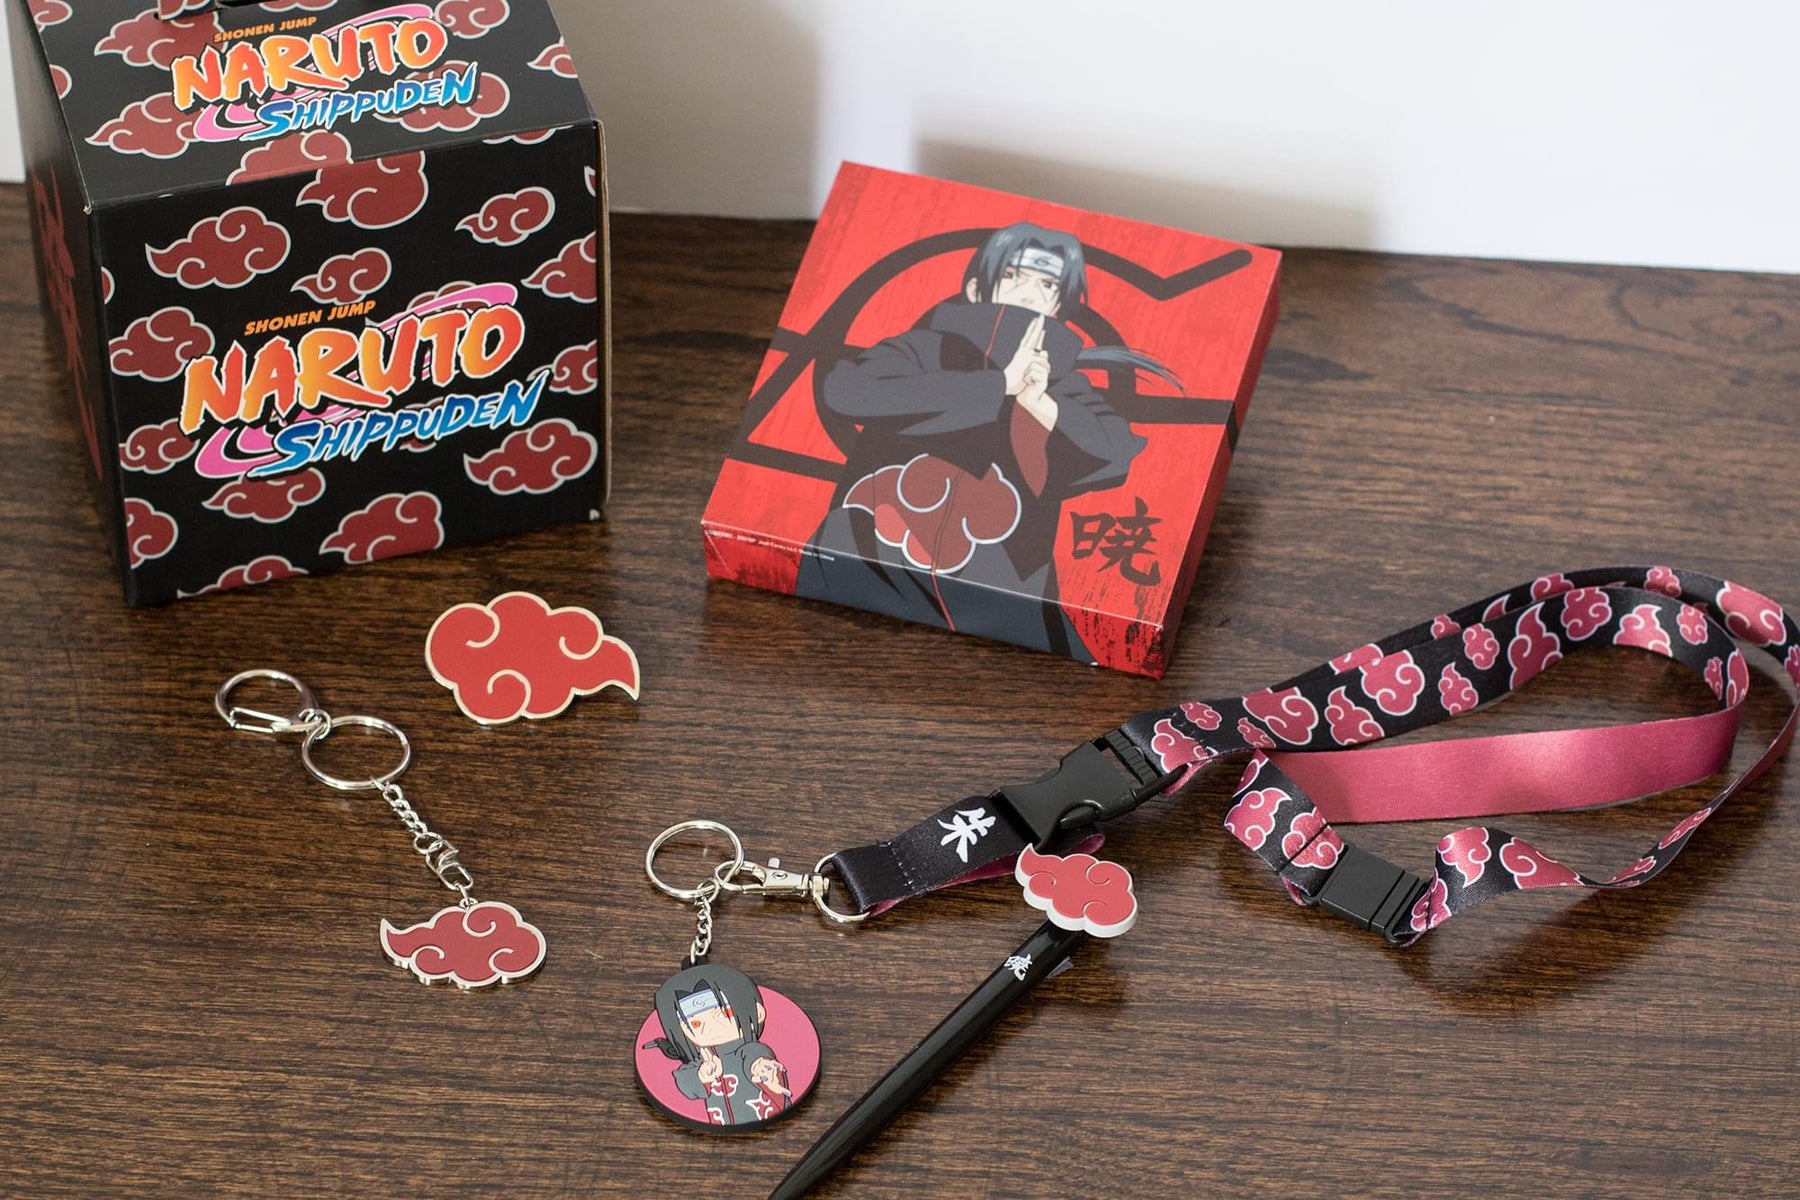 Naruto Shippuden Akatsuki Collector Looksee Box | Includes 5 Themed Collectibles